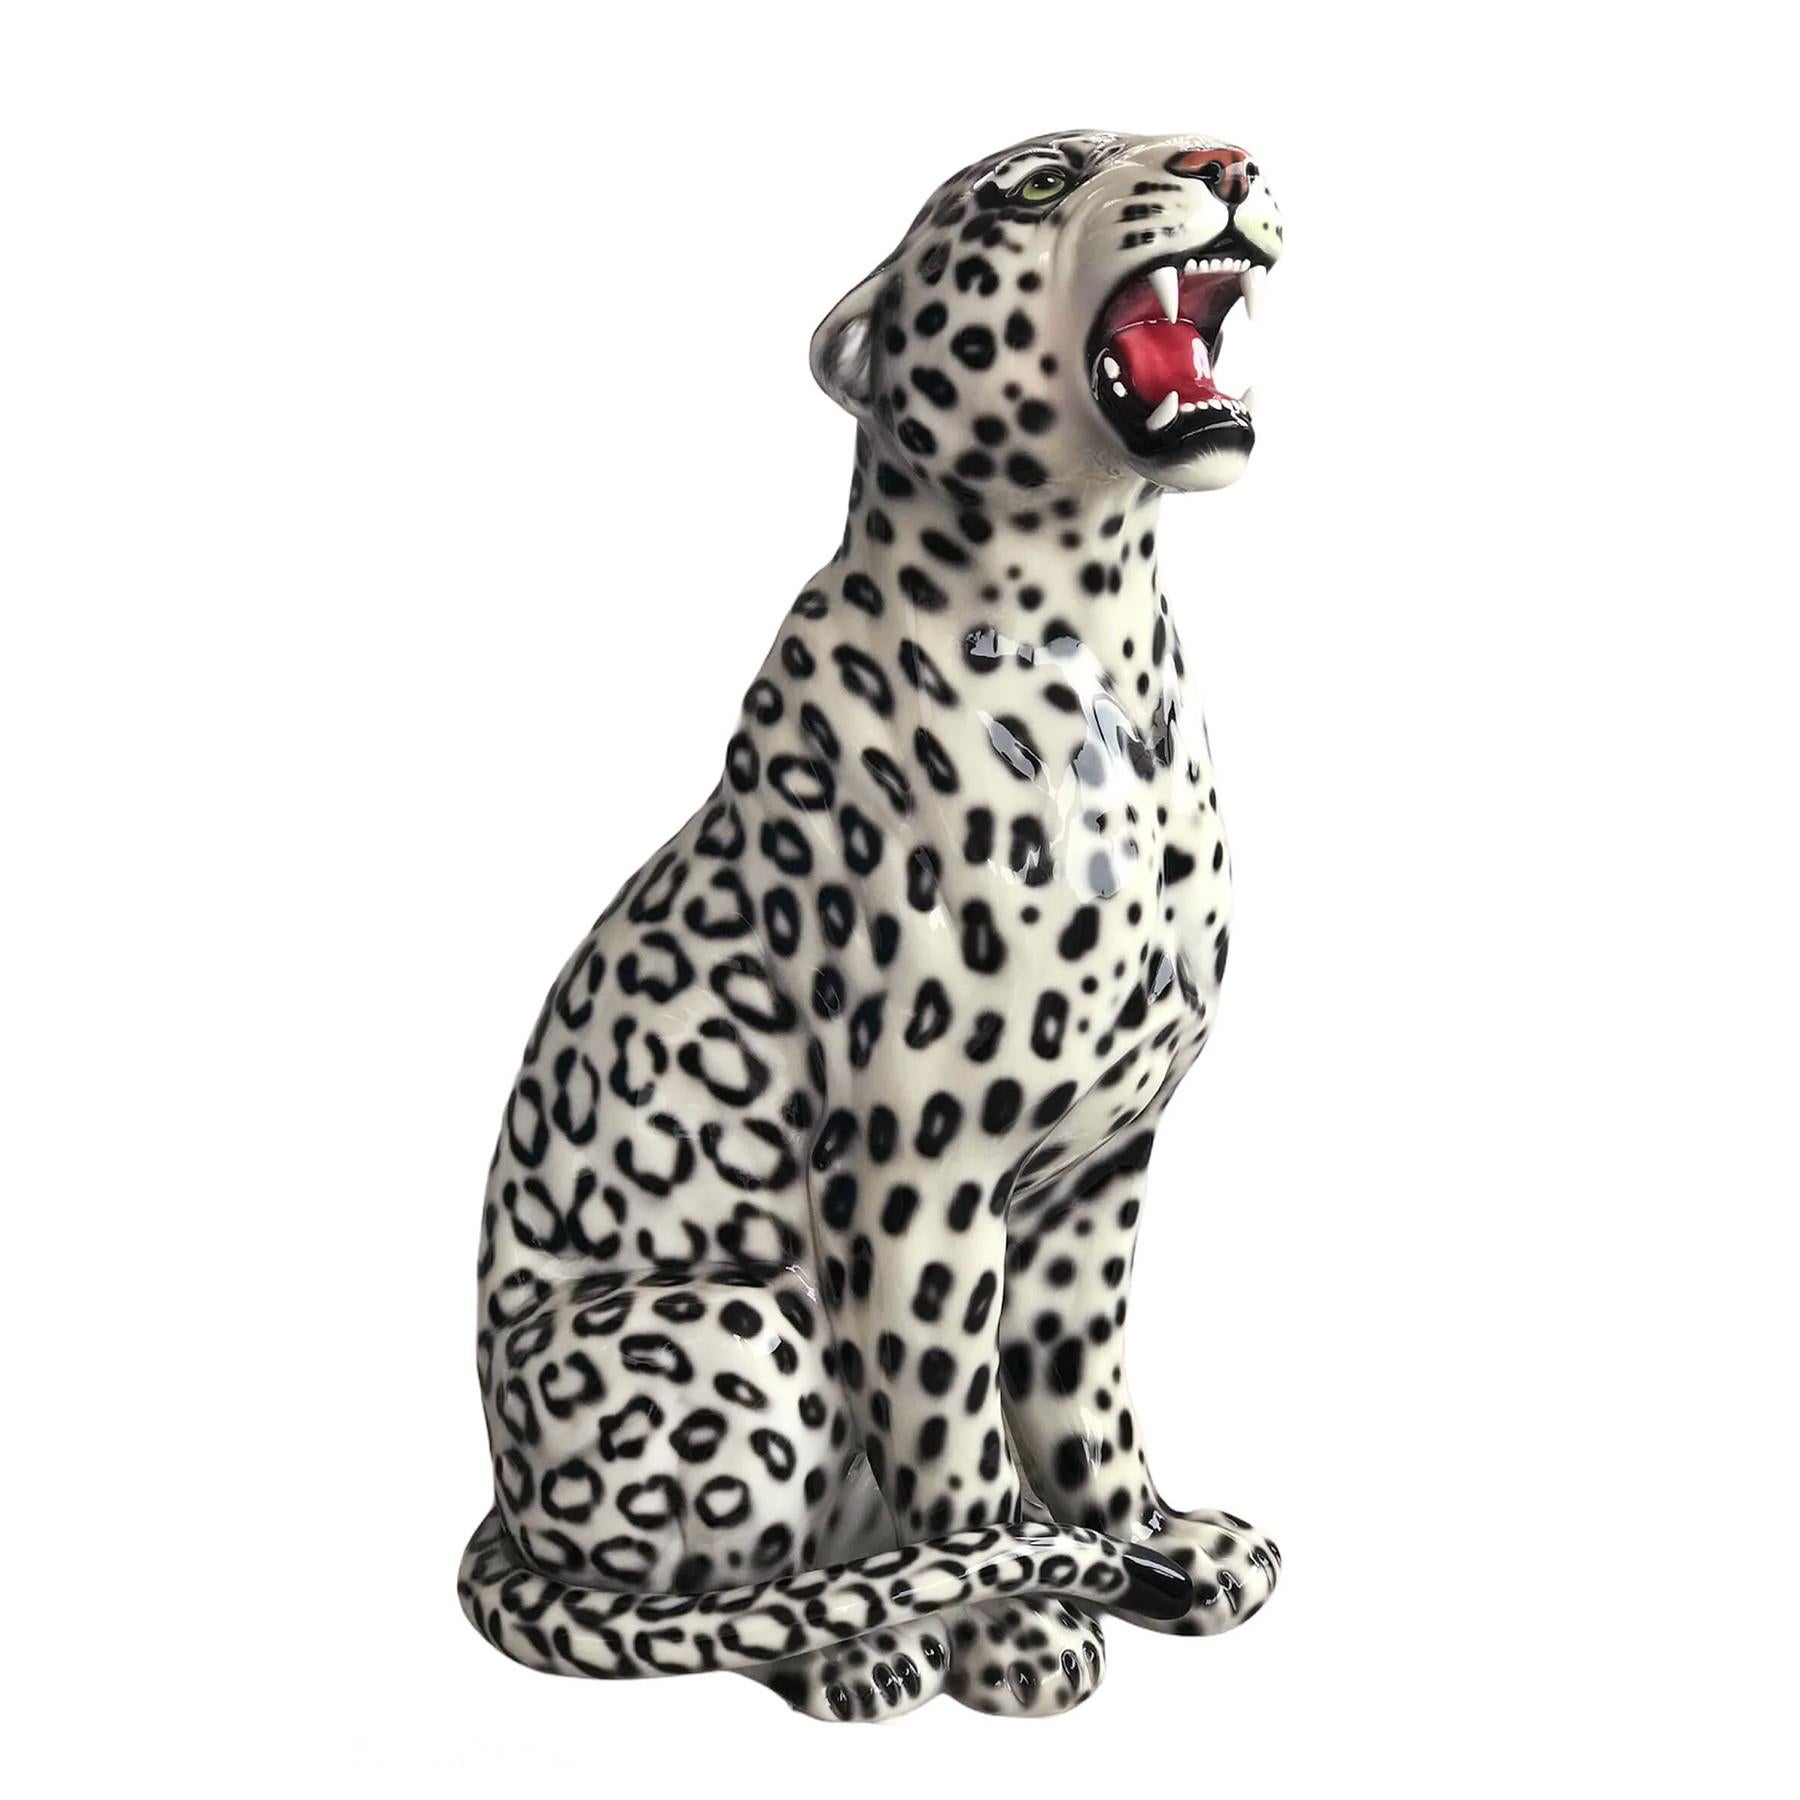 Sculpture leopard black and white left
all in hand-crafted ceramic mad ein Italy.